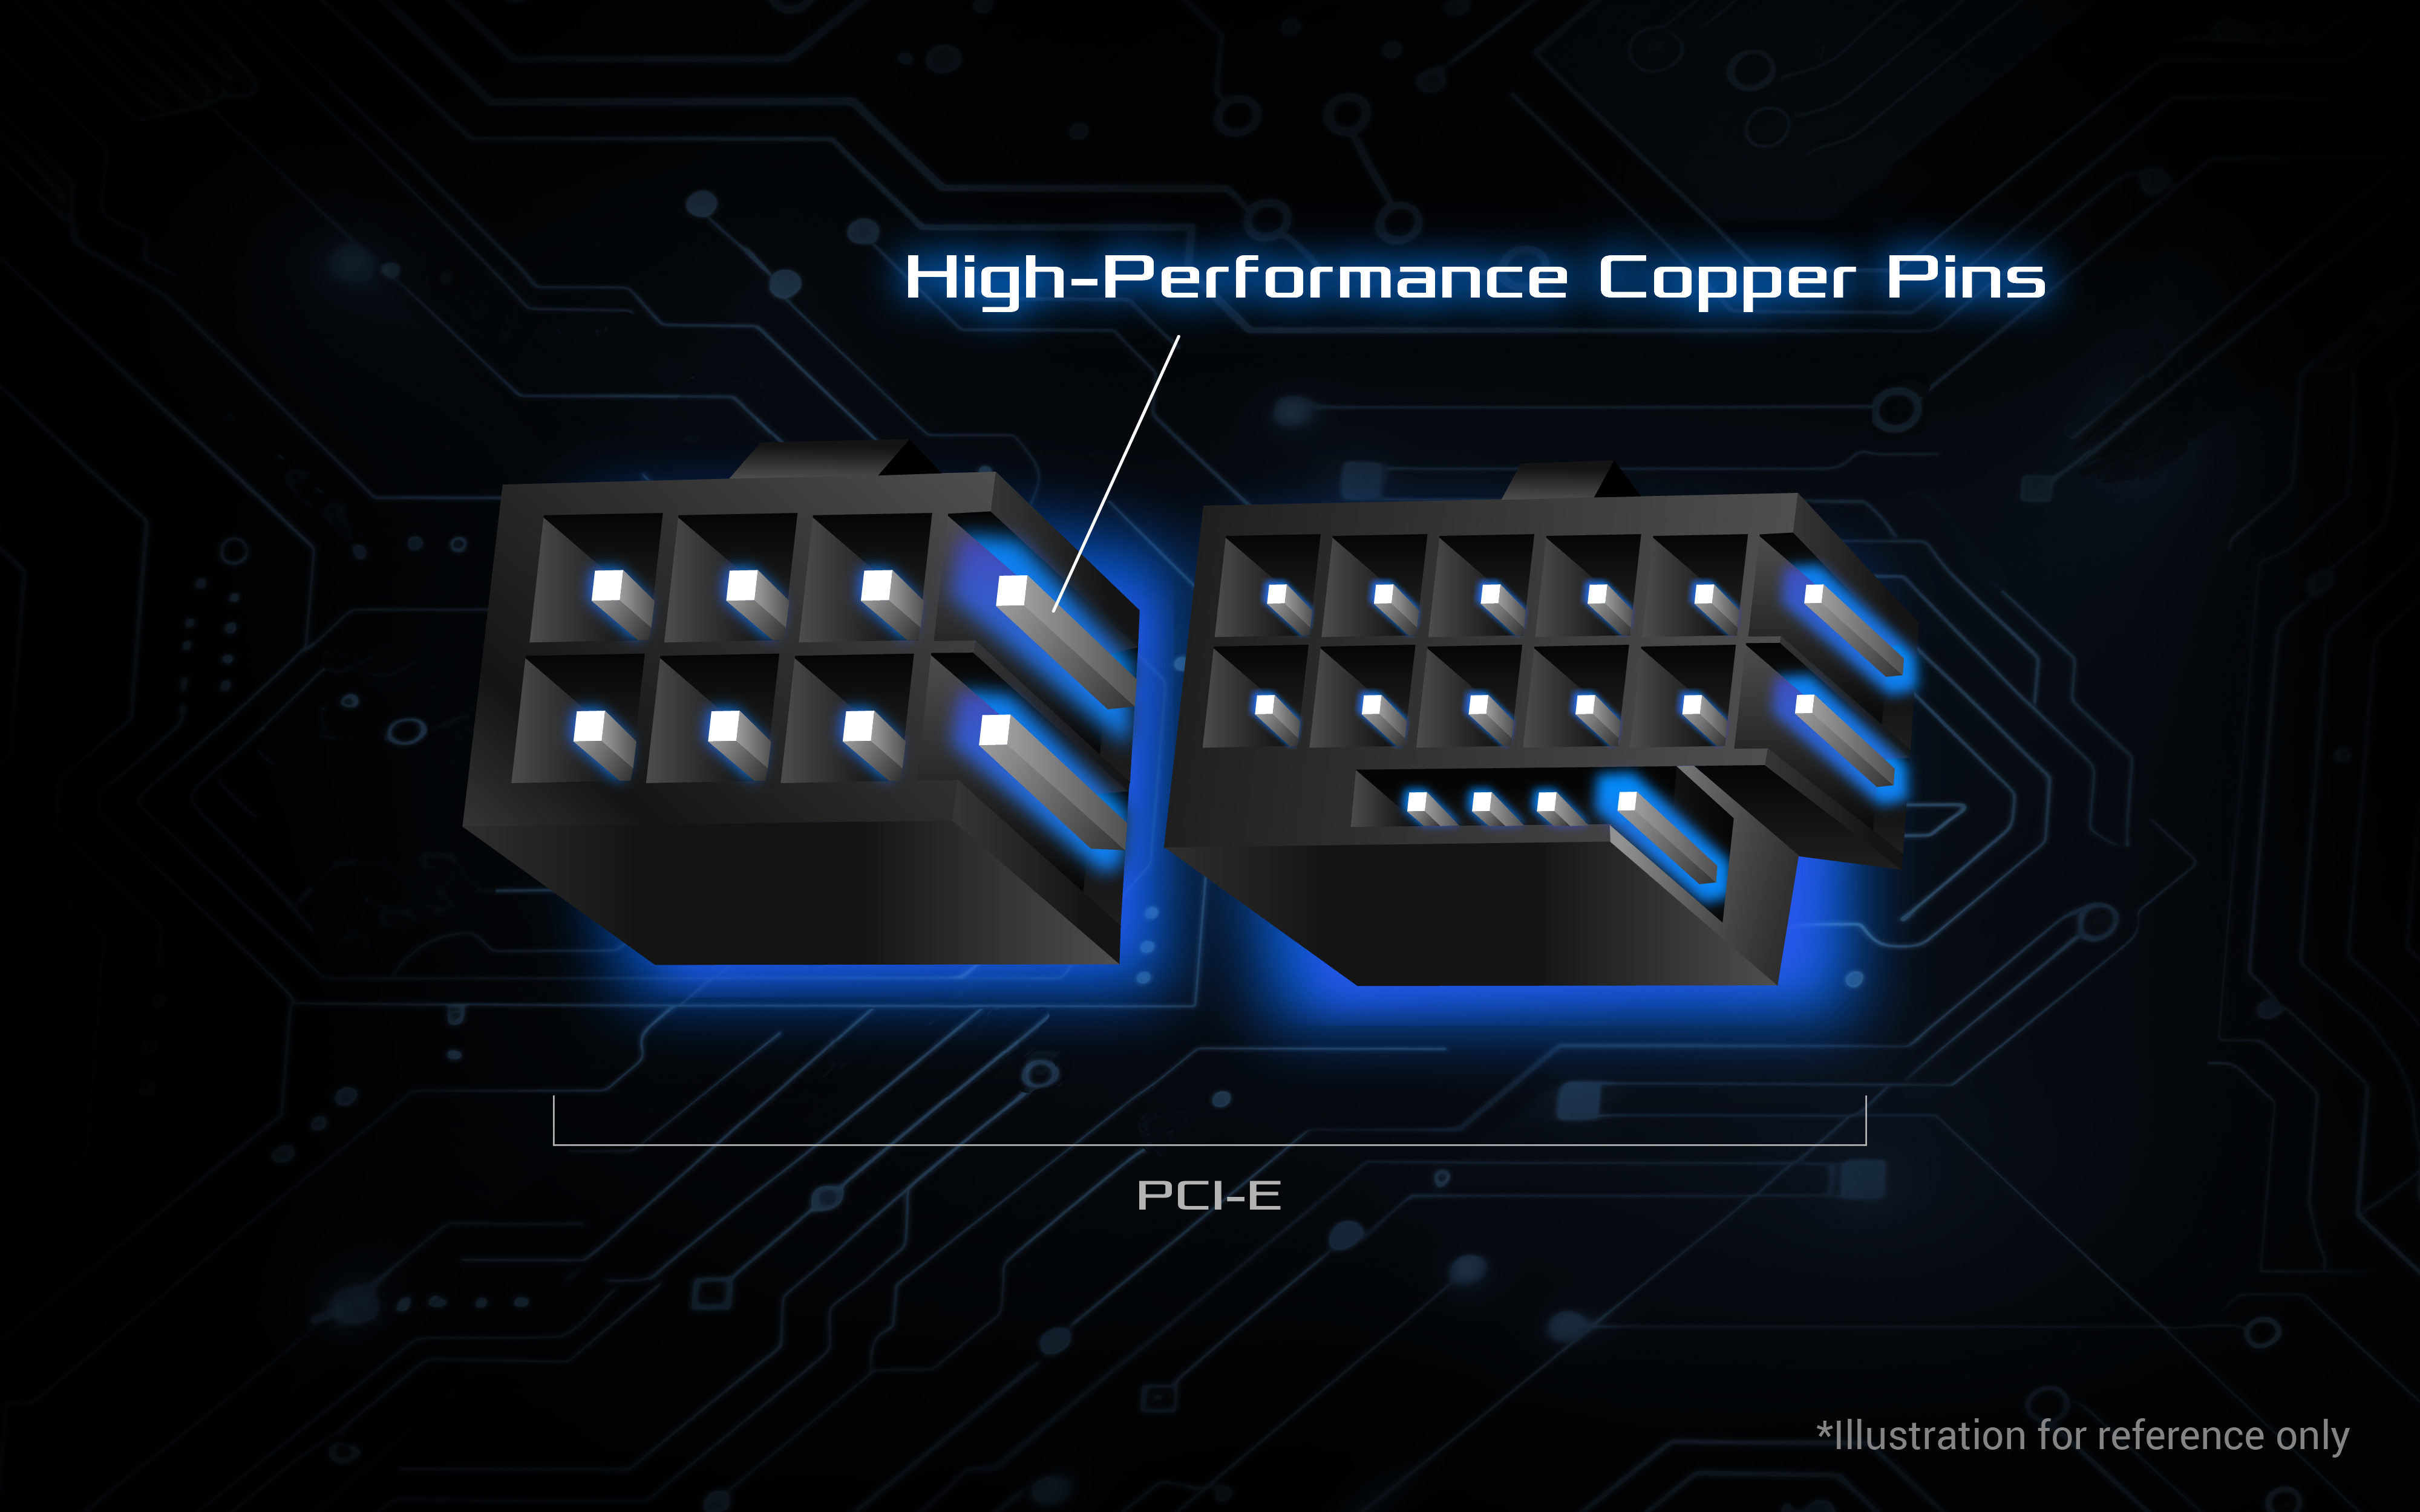 High-Performance Copper Pins